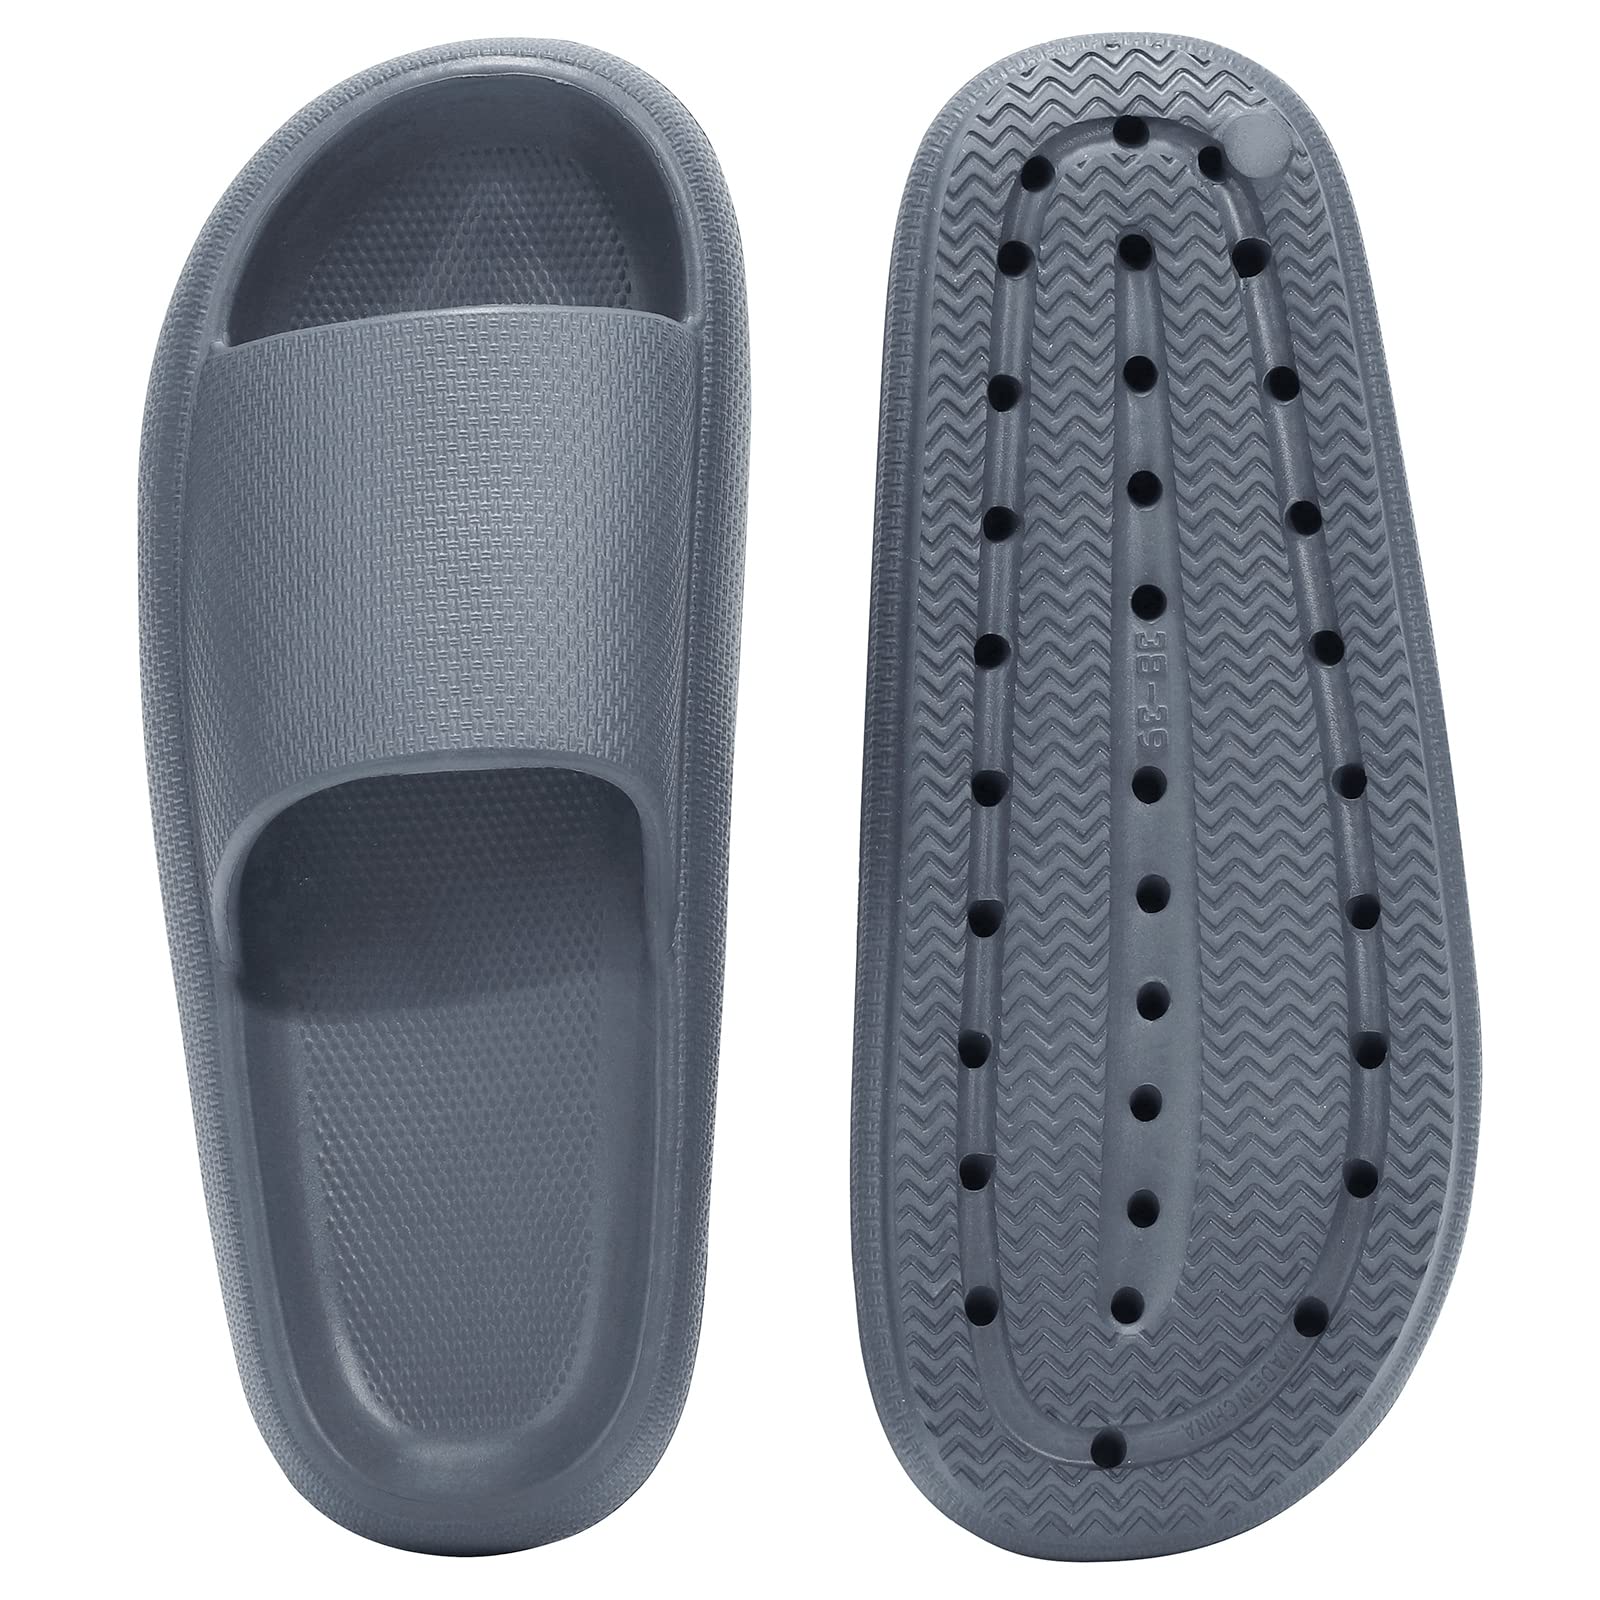 welltree Slides for Women Men Pillow Slippers Non-Slip Bathroom Shower Sandals Soft Thick Sole Indoor and Outdoor Slides